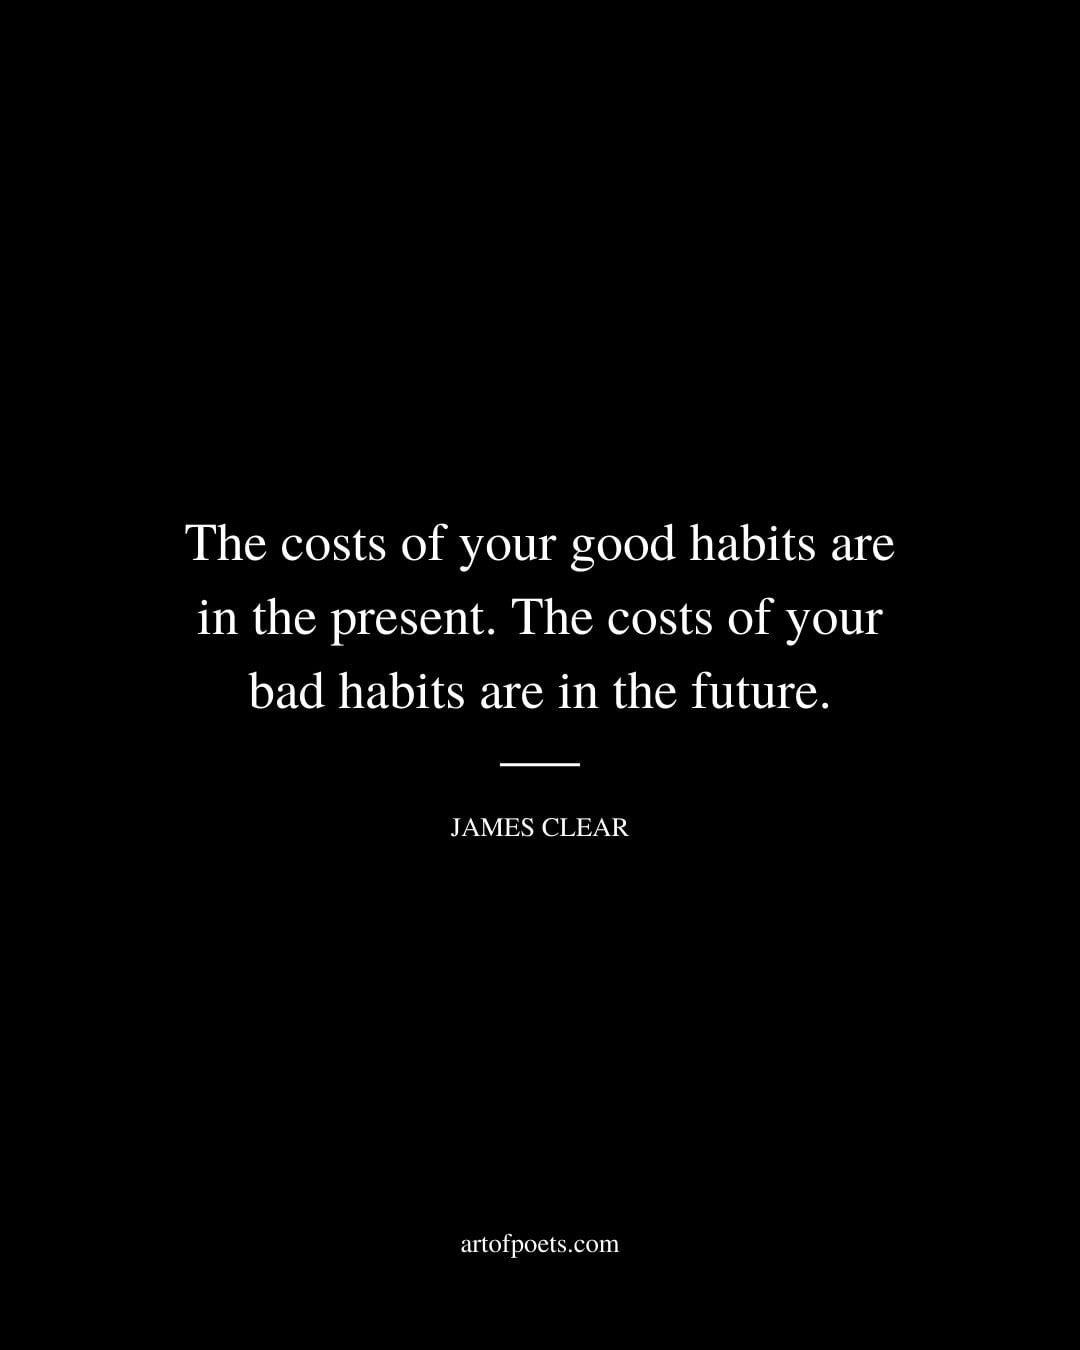 The costs of your good habits are in the present. The costs of your bad habits are in the future